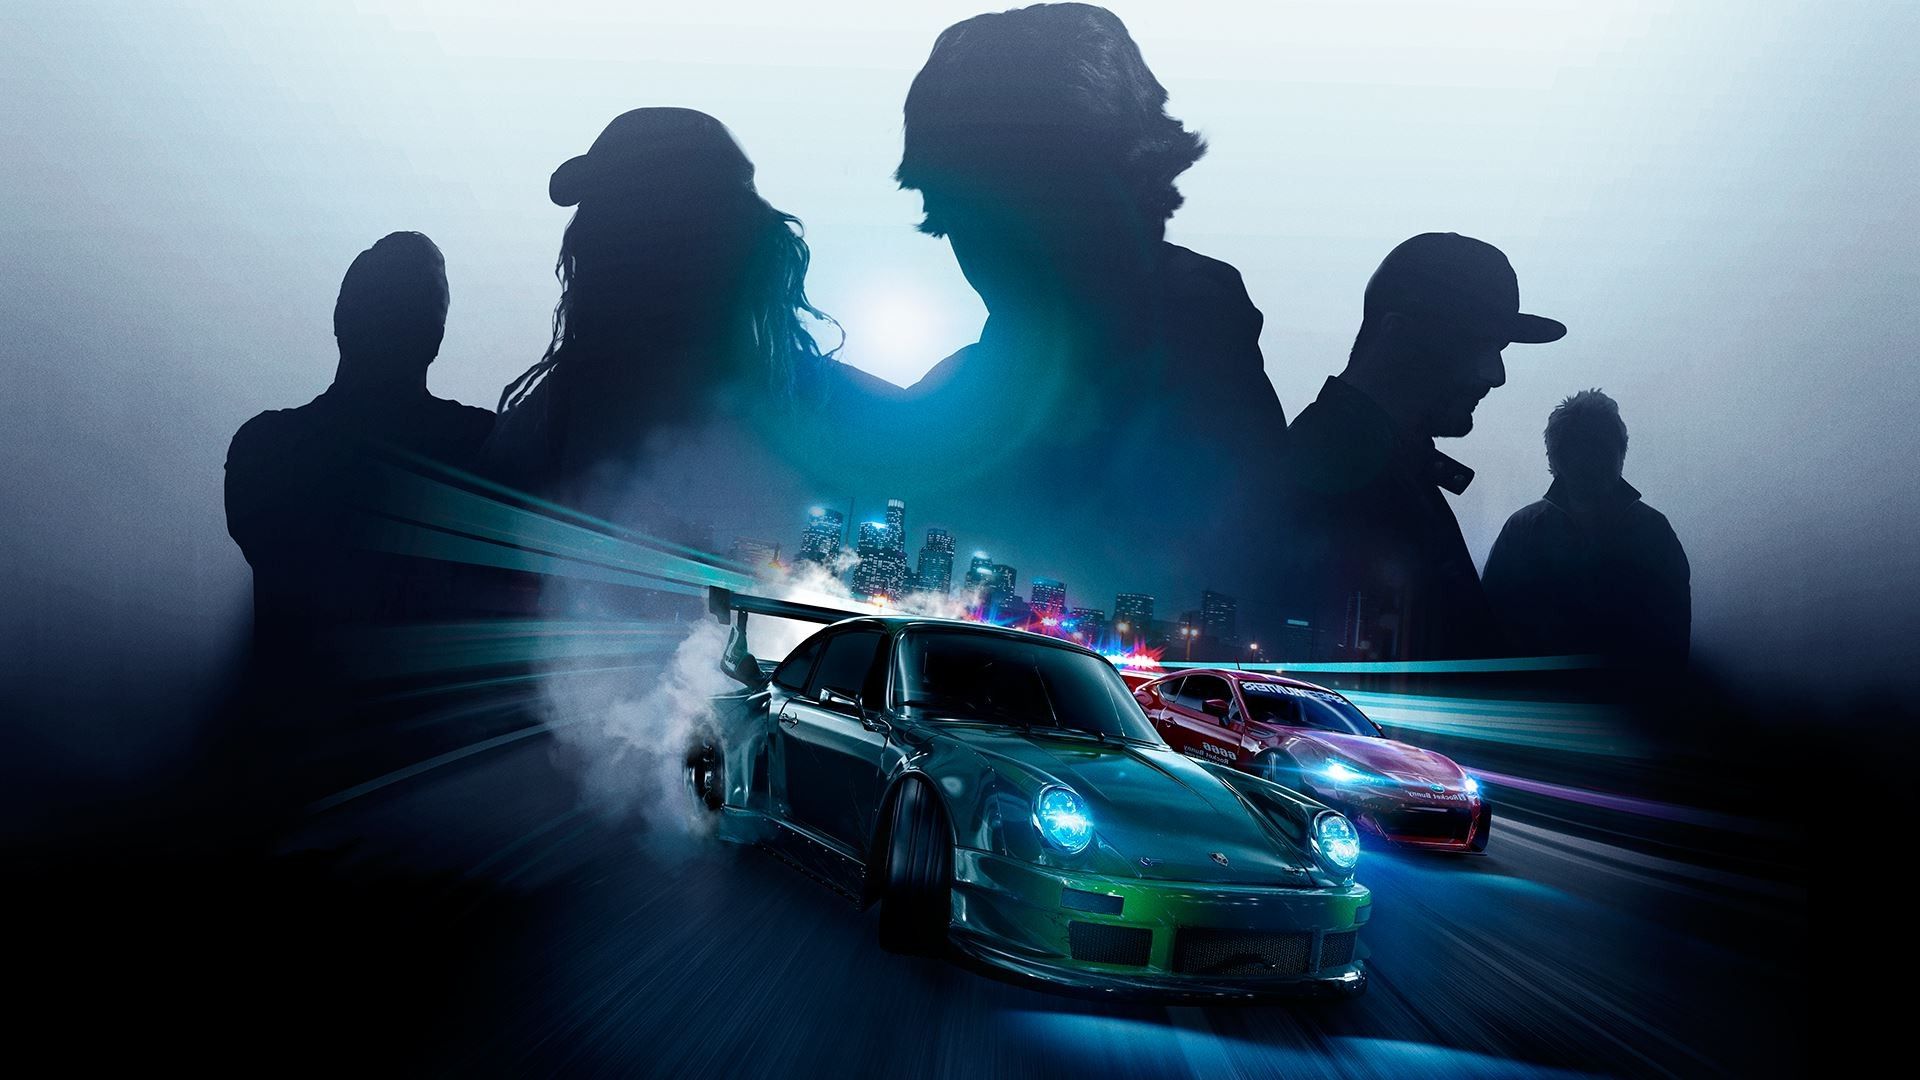 Need for speed image wallpaper